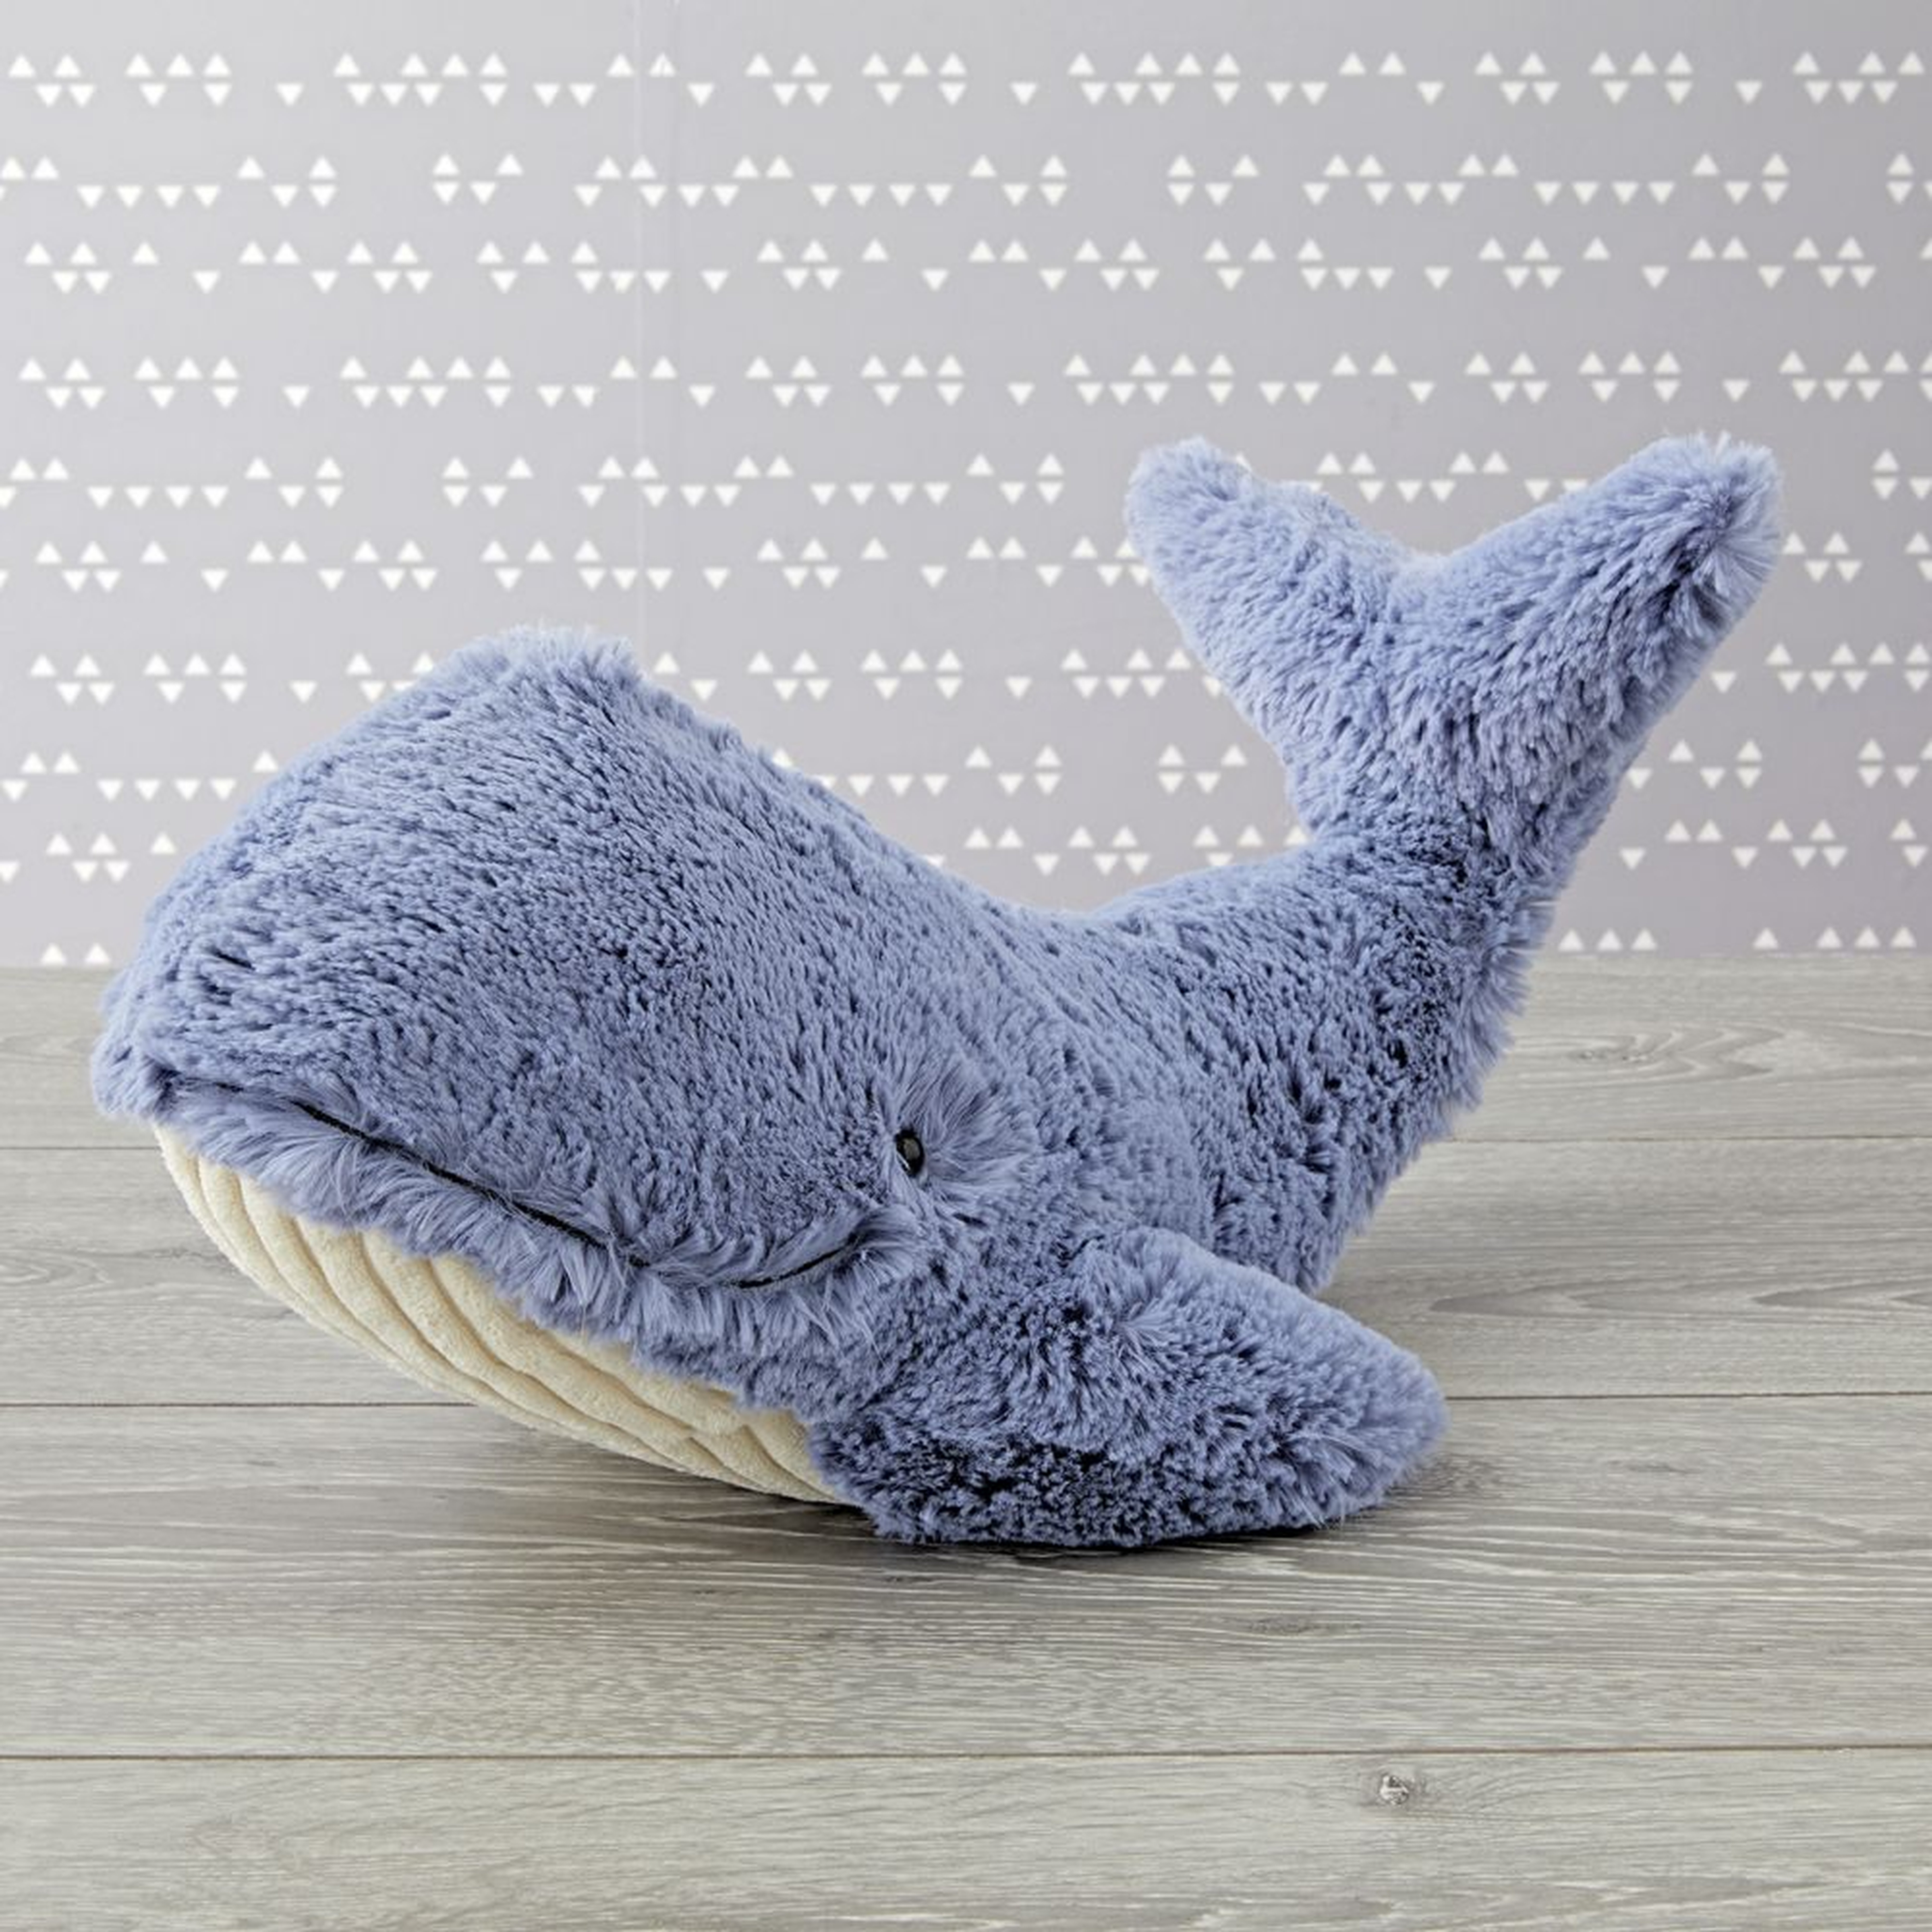 Jellycat ® Whale Stuffed Animal - Crate and Barrel